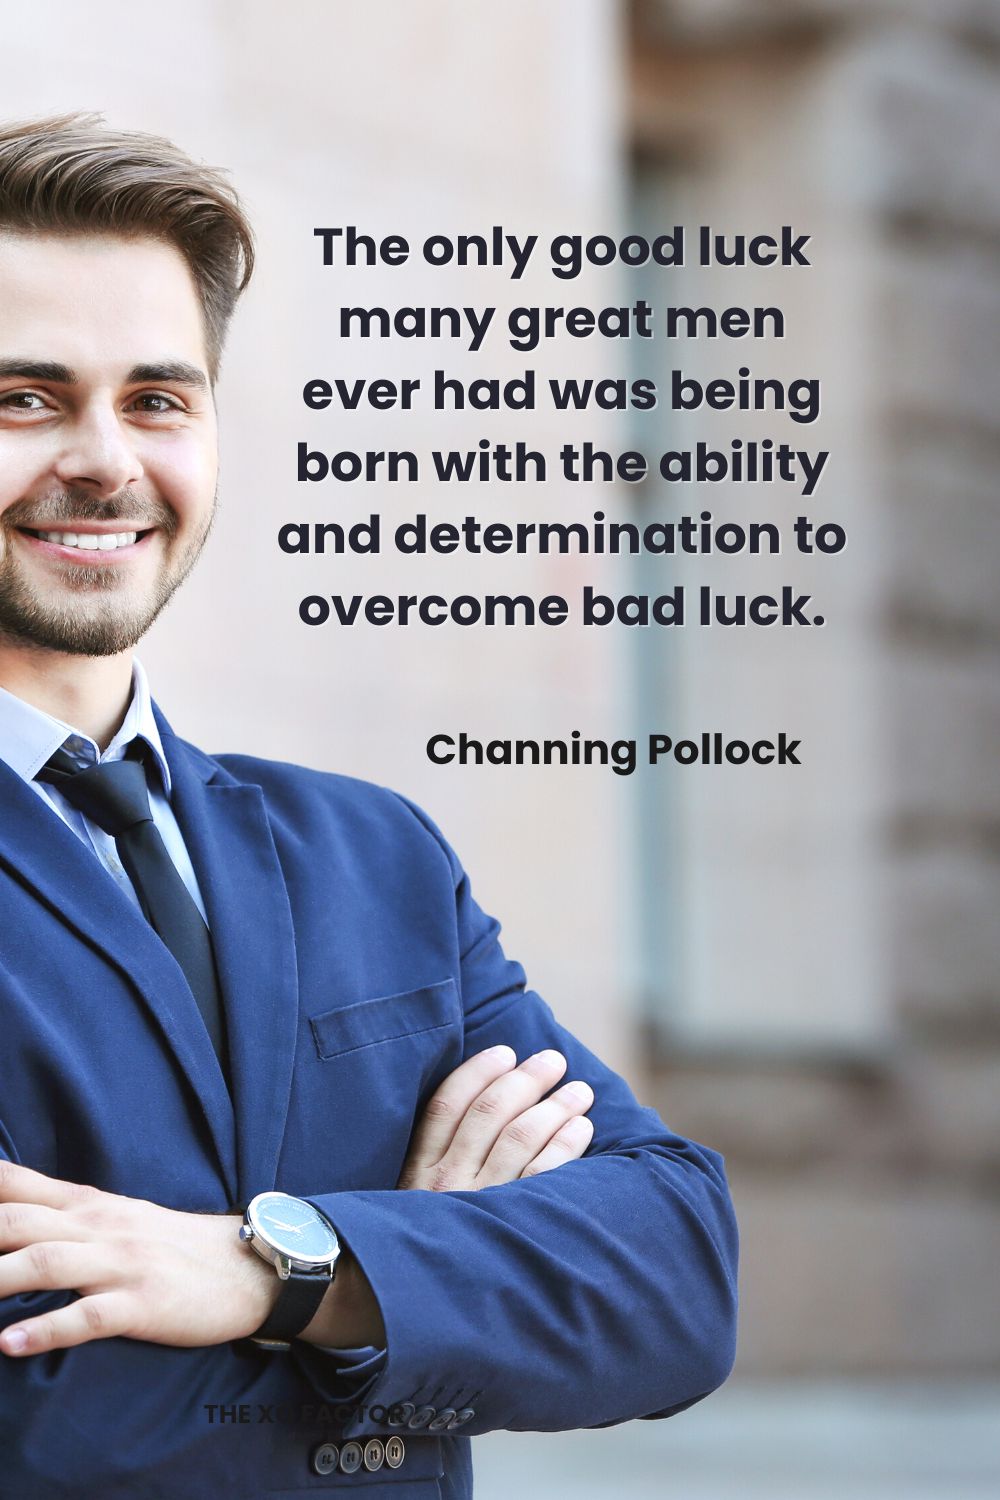 The only good luck many great men ever had was being born with the ability and determination to overcome bad luck. Channing Pollock